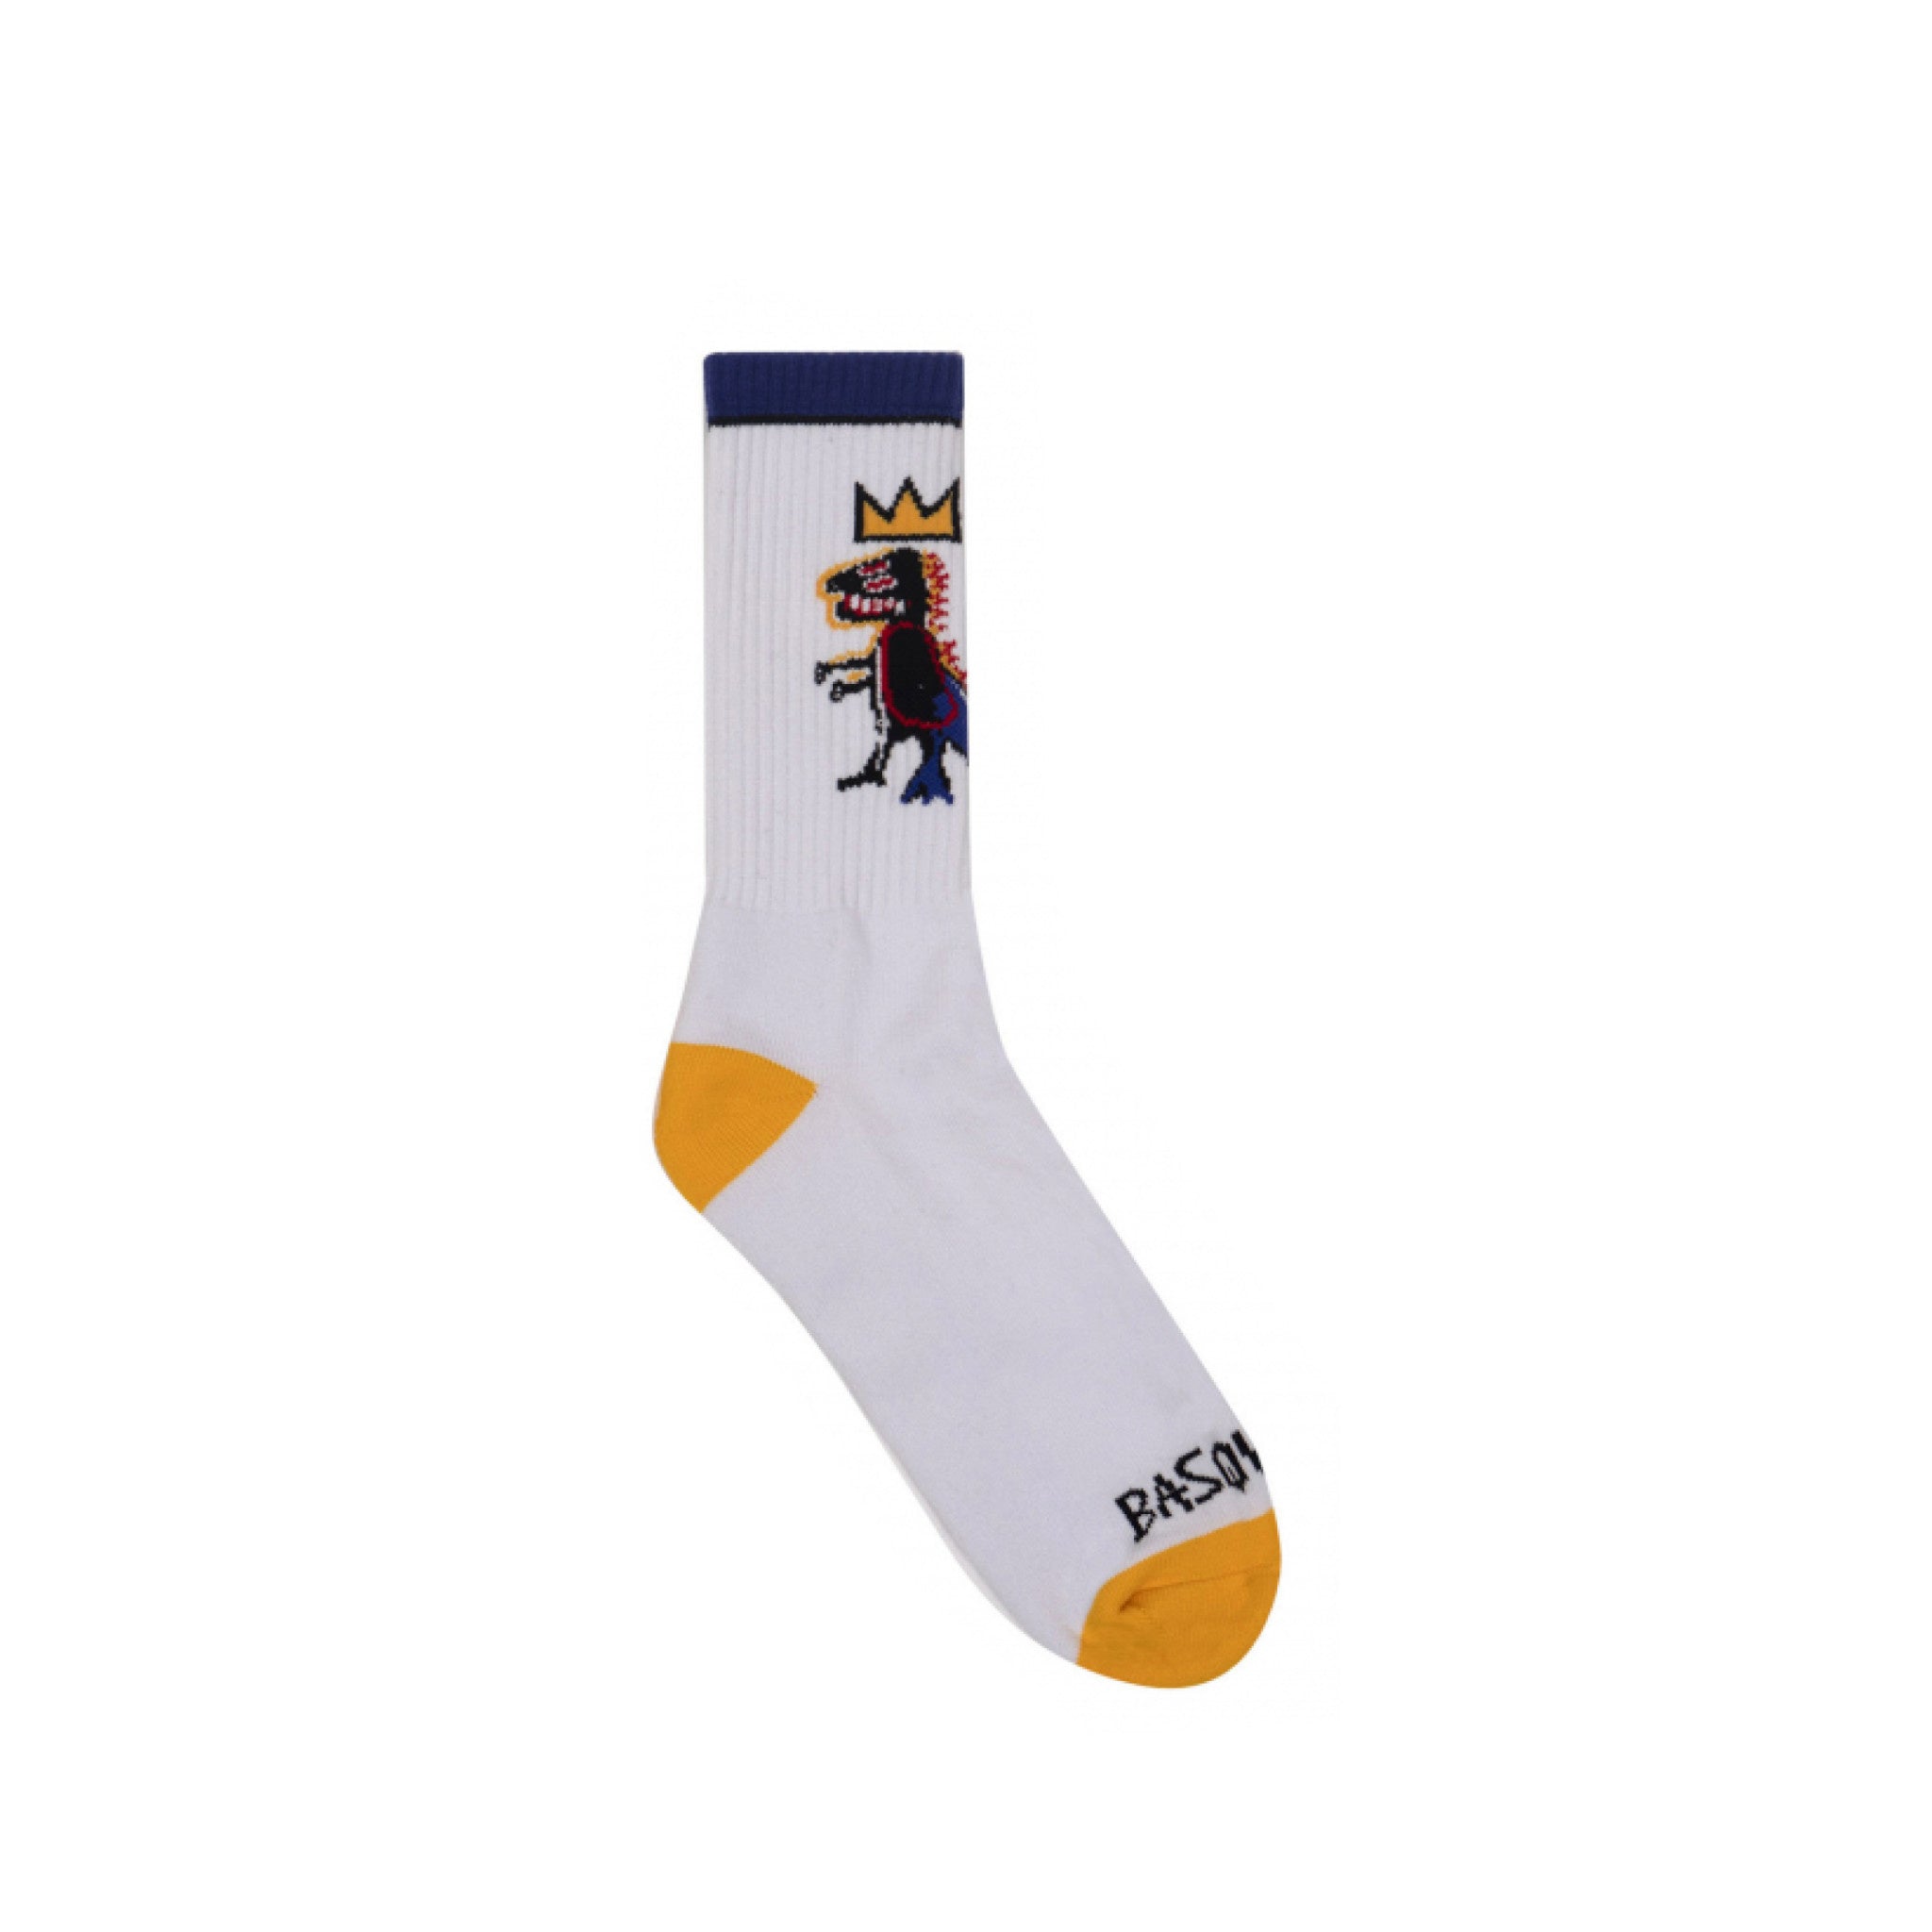 Shop the Basquiat PEZ DISPENSER Crew Socks – Bold and Colorful